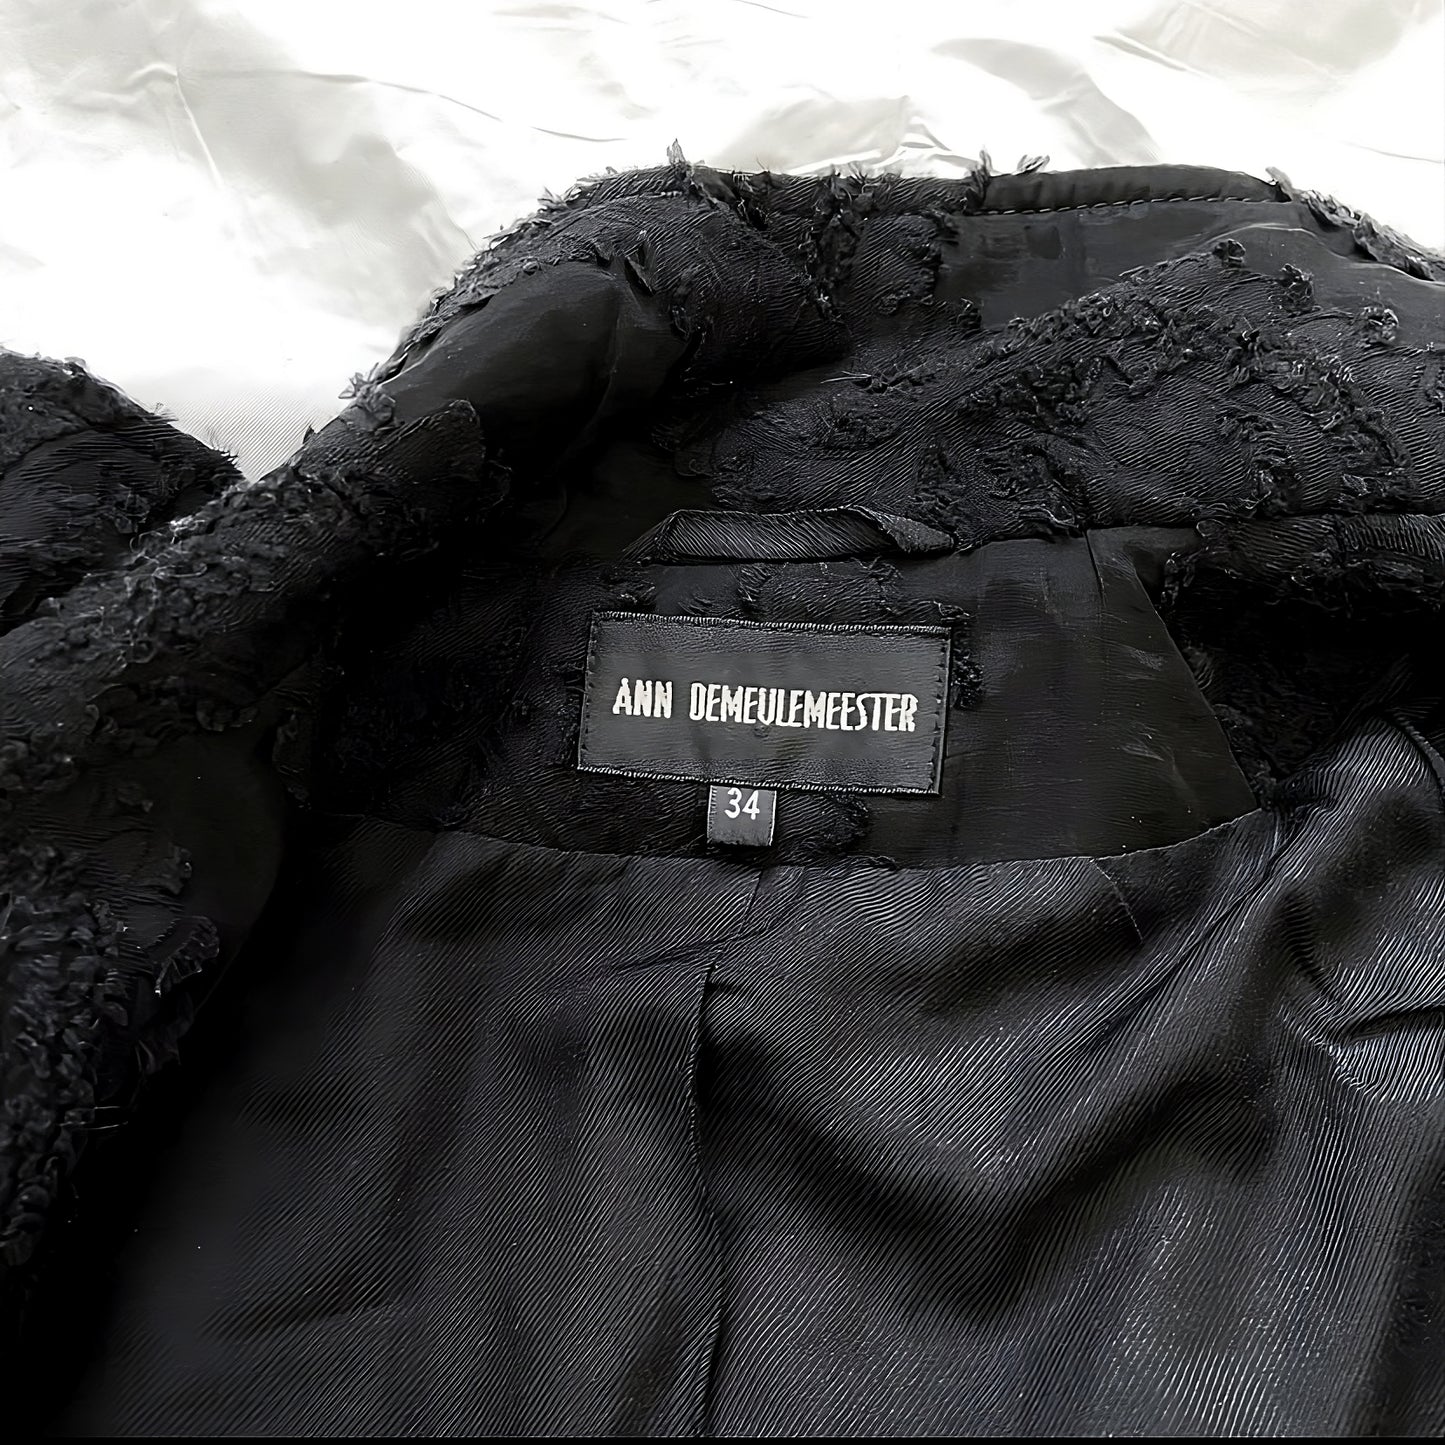 Ann Demeulemeester Fall 2014 Lace Embroidery Jacket 34